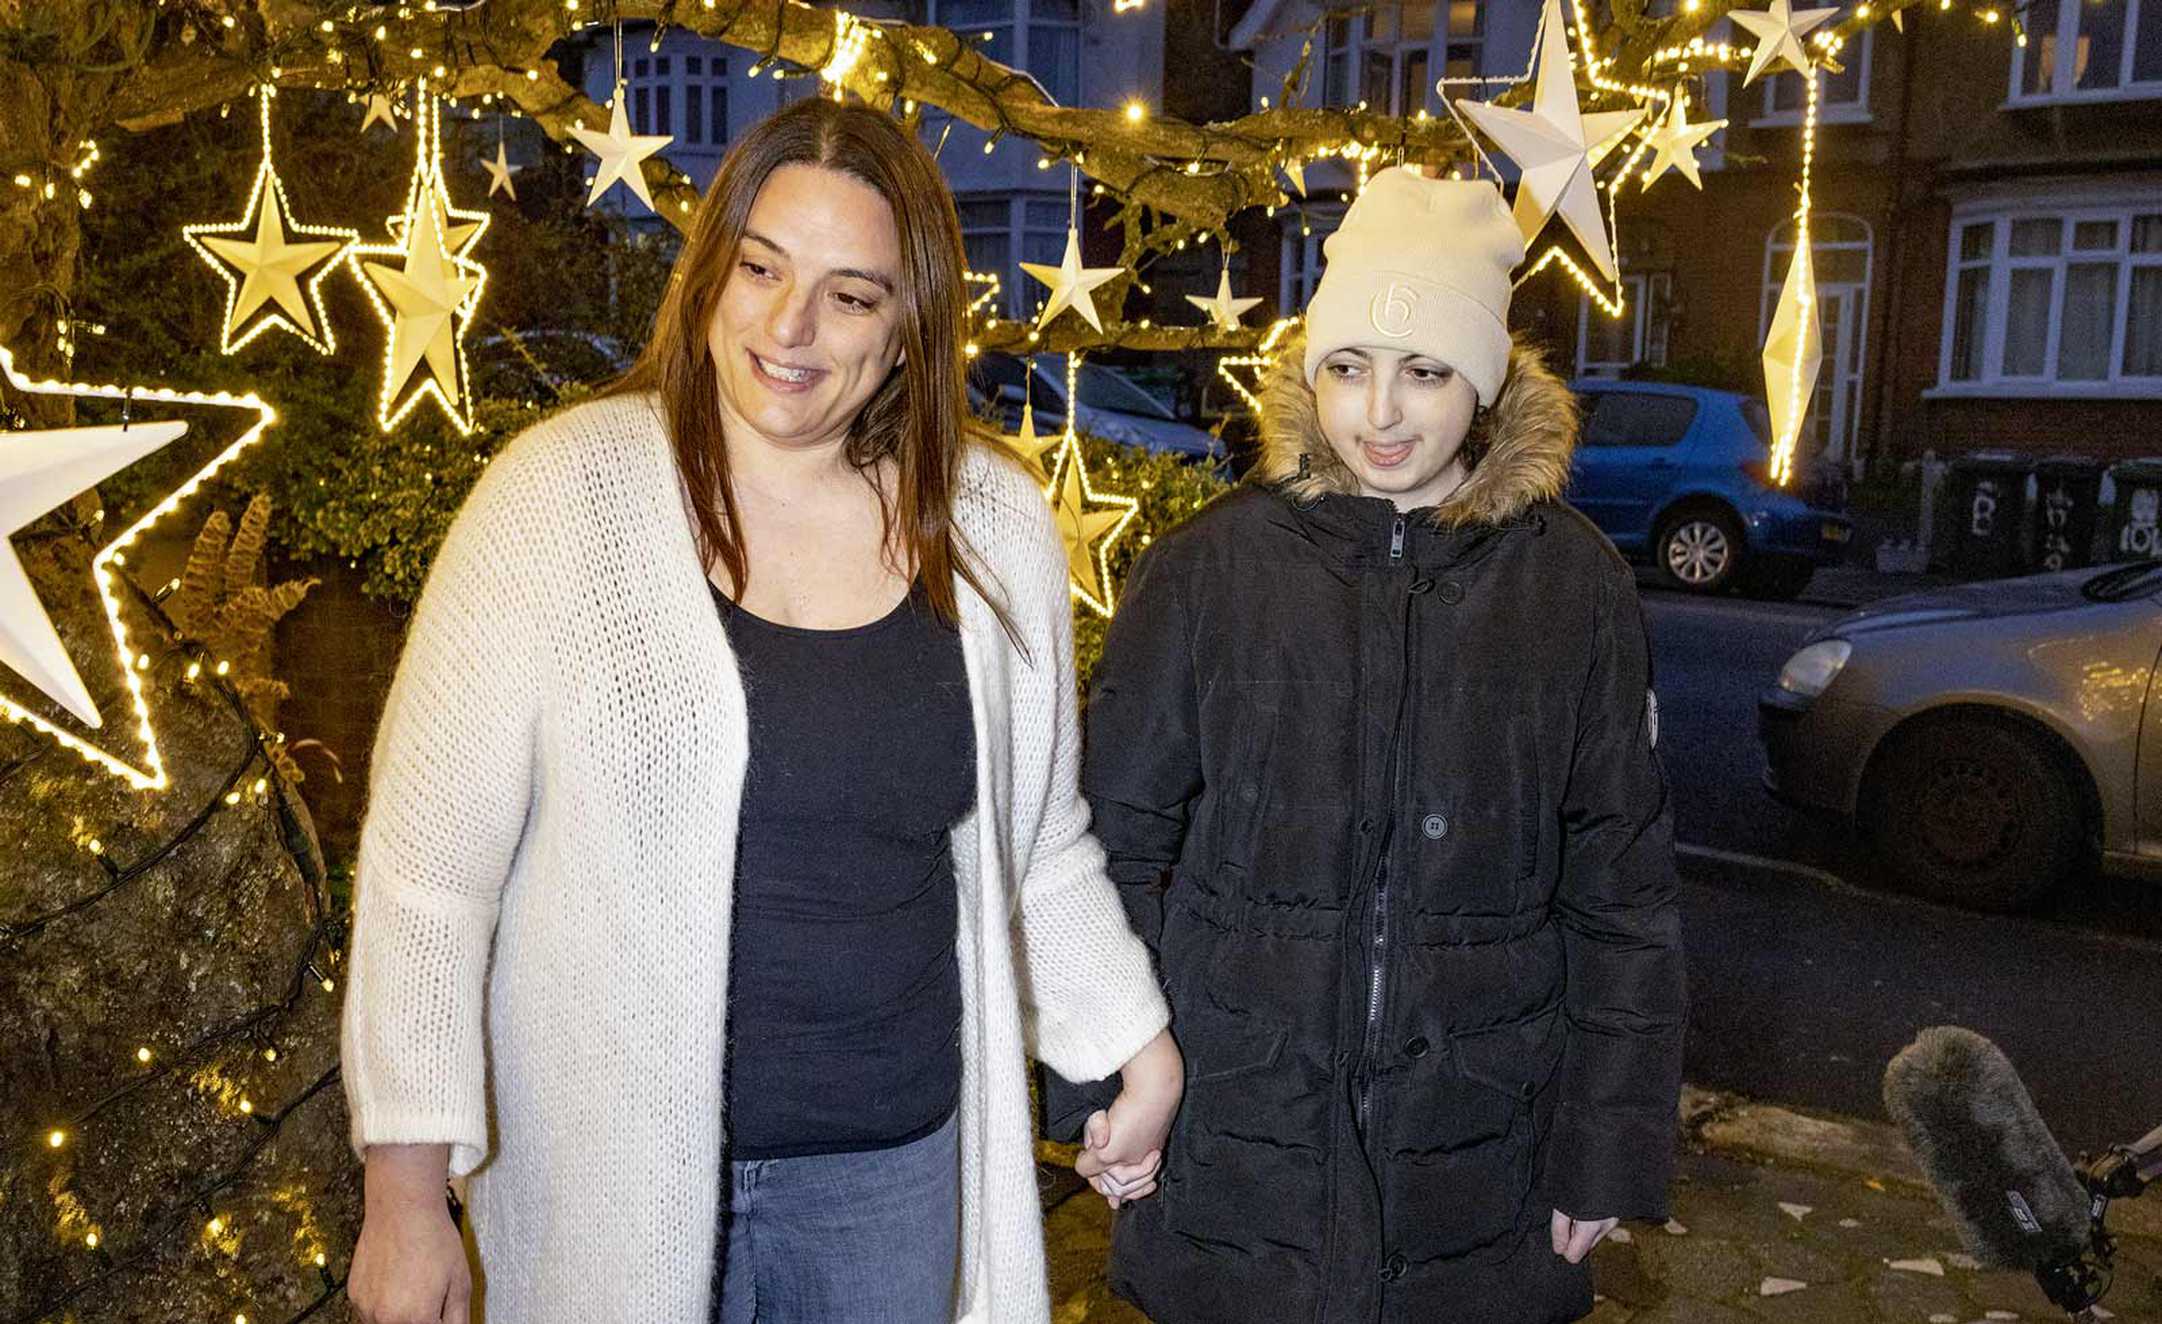 Ellie and mum, Maria standing in front of the brightly lit wish tree, outside her house.